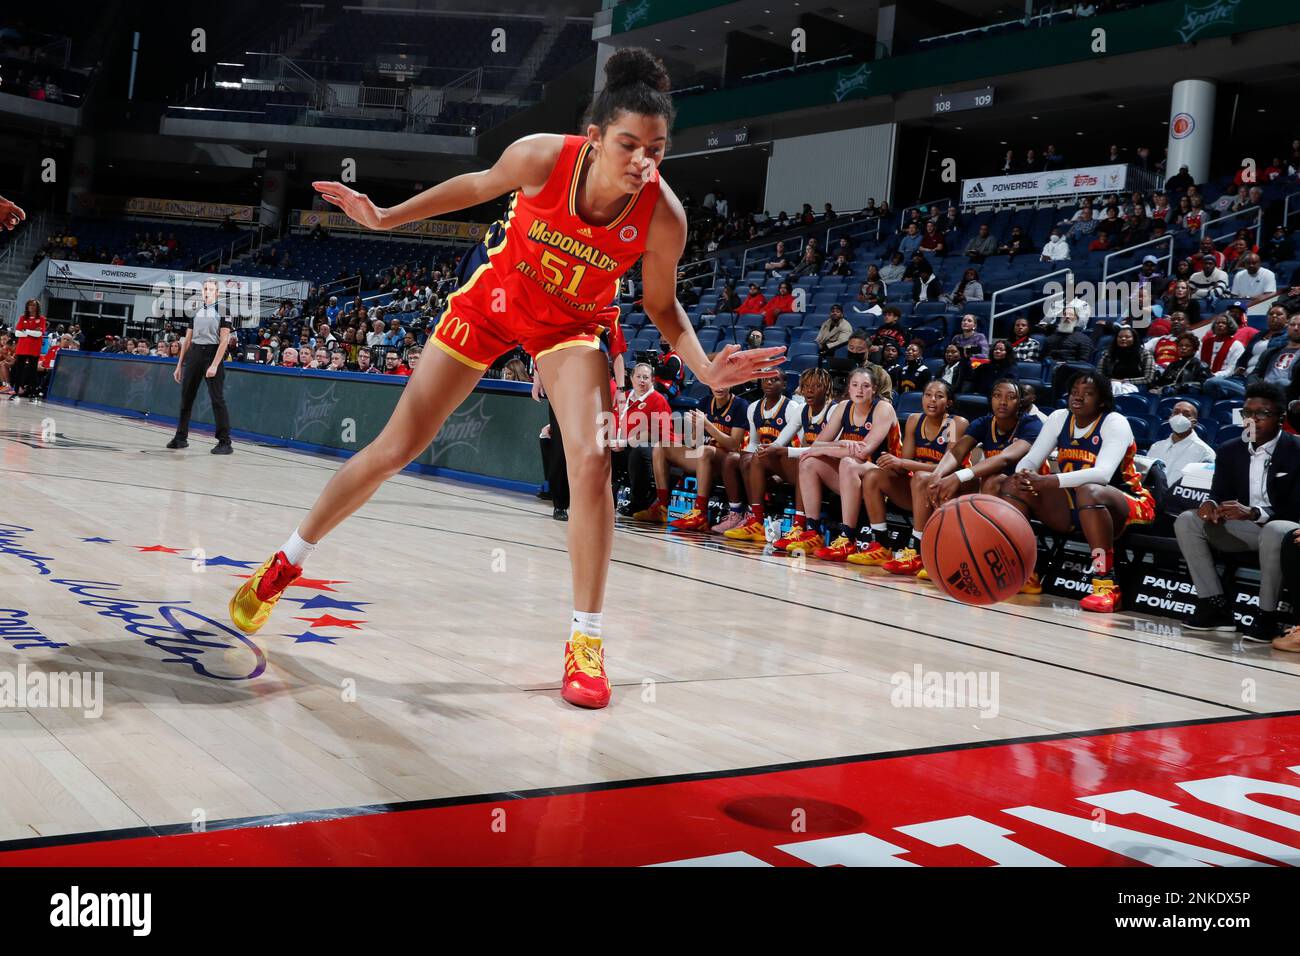 sCHICAGO, IL - MARCH 29: McDonalds High School All American Lauren Betts  (51) lets the ball go out of bounds during the 2022 McDonalds High School  All American Girls Game at Wintrust